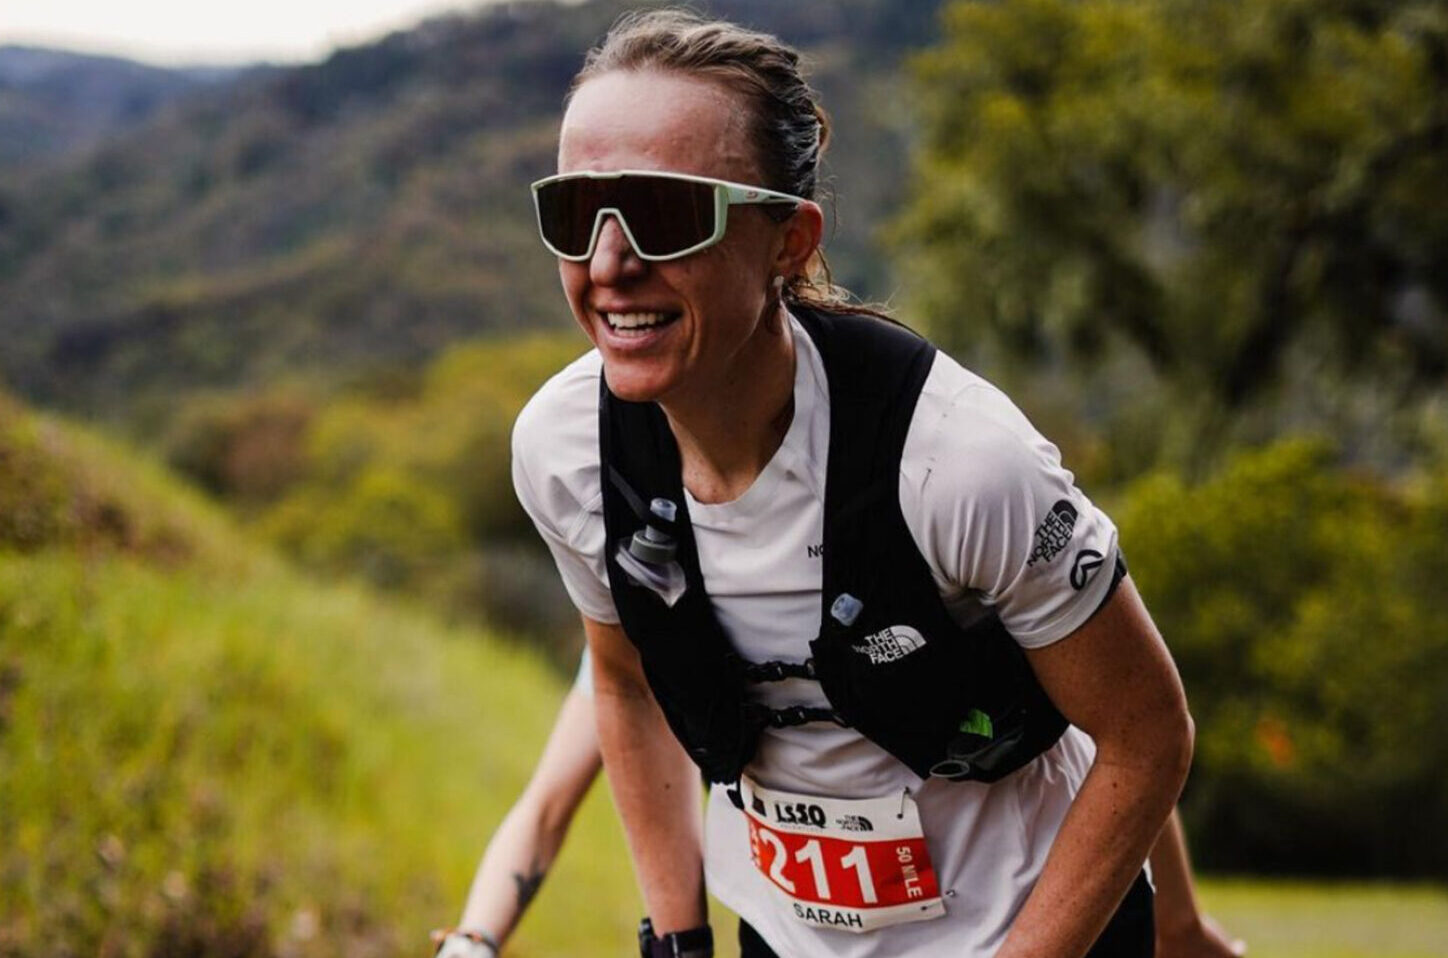 Sarah Keyes on Living &#038; Training in the Adirondacks, US Long Distance Team Dreams, &#038; Pastry (Mis)adventures (Ep.171), BLISTER